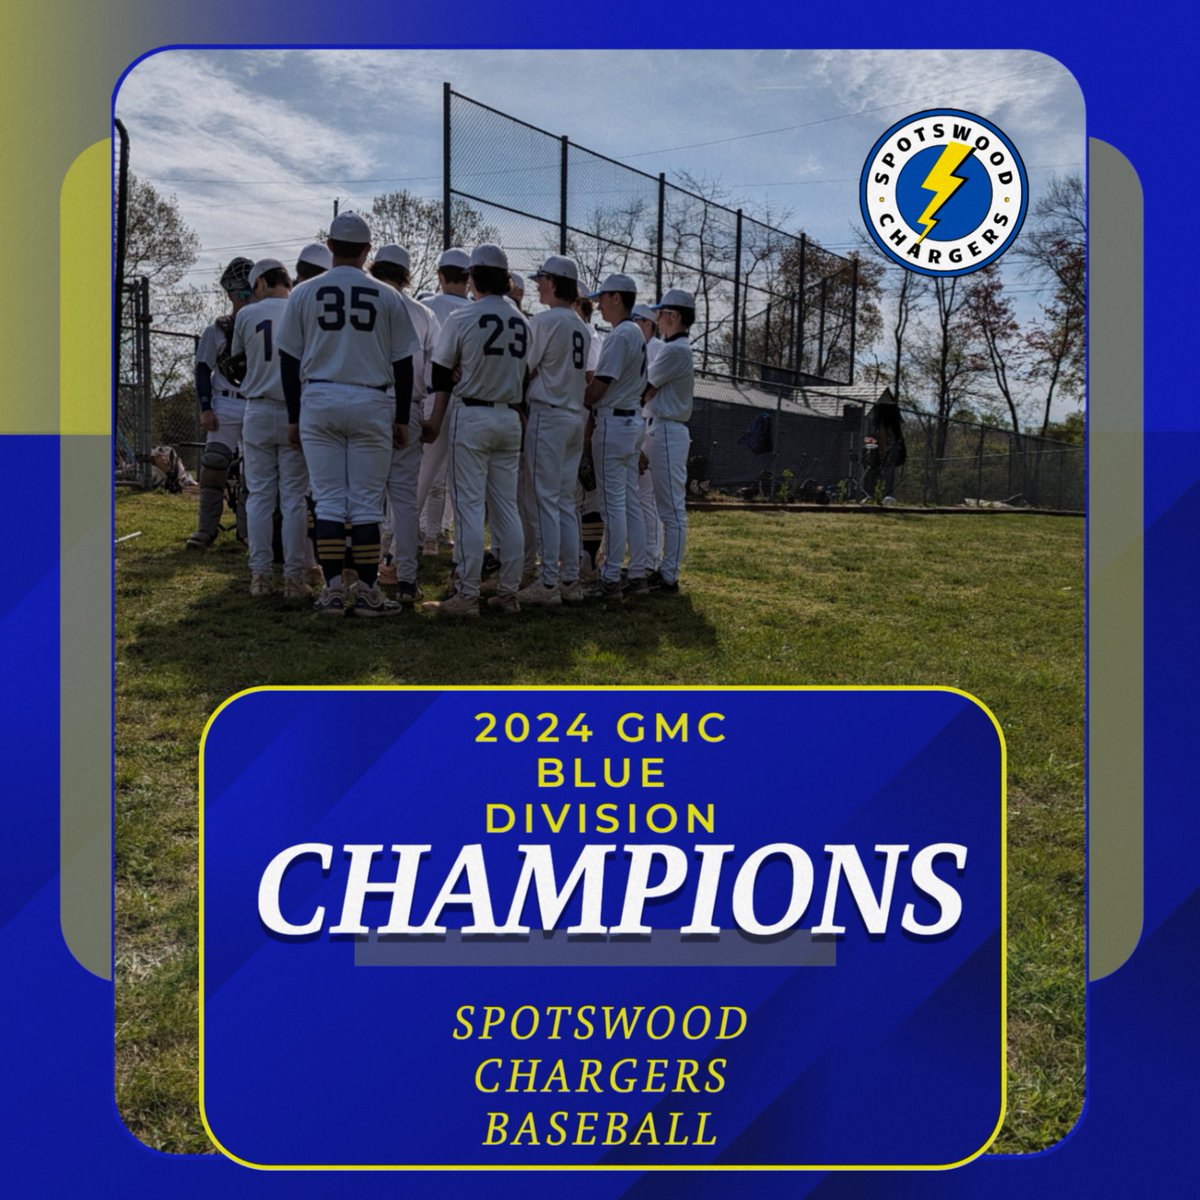 The Chargers clinched the 2024 Blue Division Championship with a 15-9 victory over St. Thomas. Will Buchan knocked in 4 runs. Ryan Orth picked up the victory in relief. highschoolsports.nj.com/game/917548